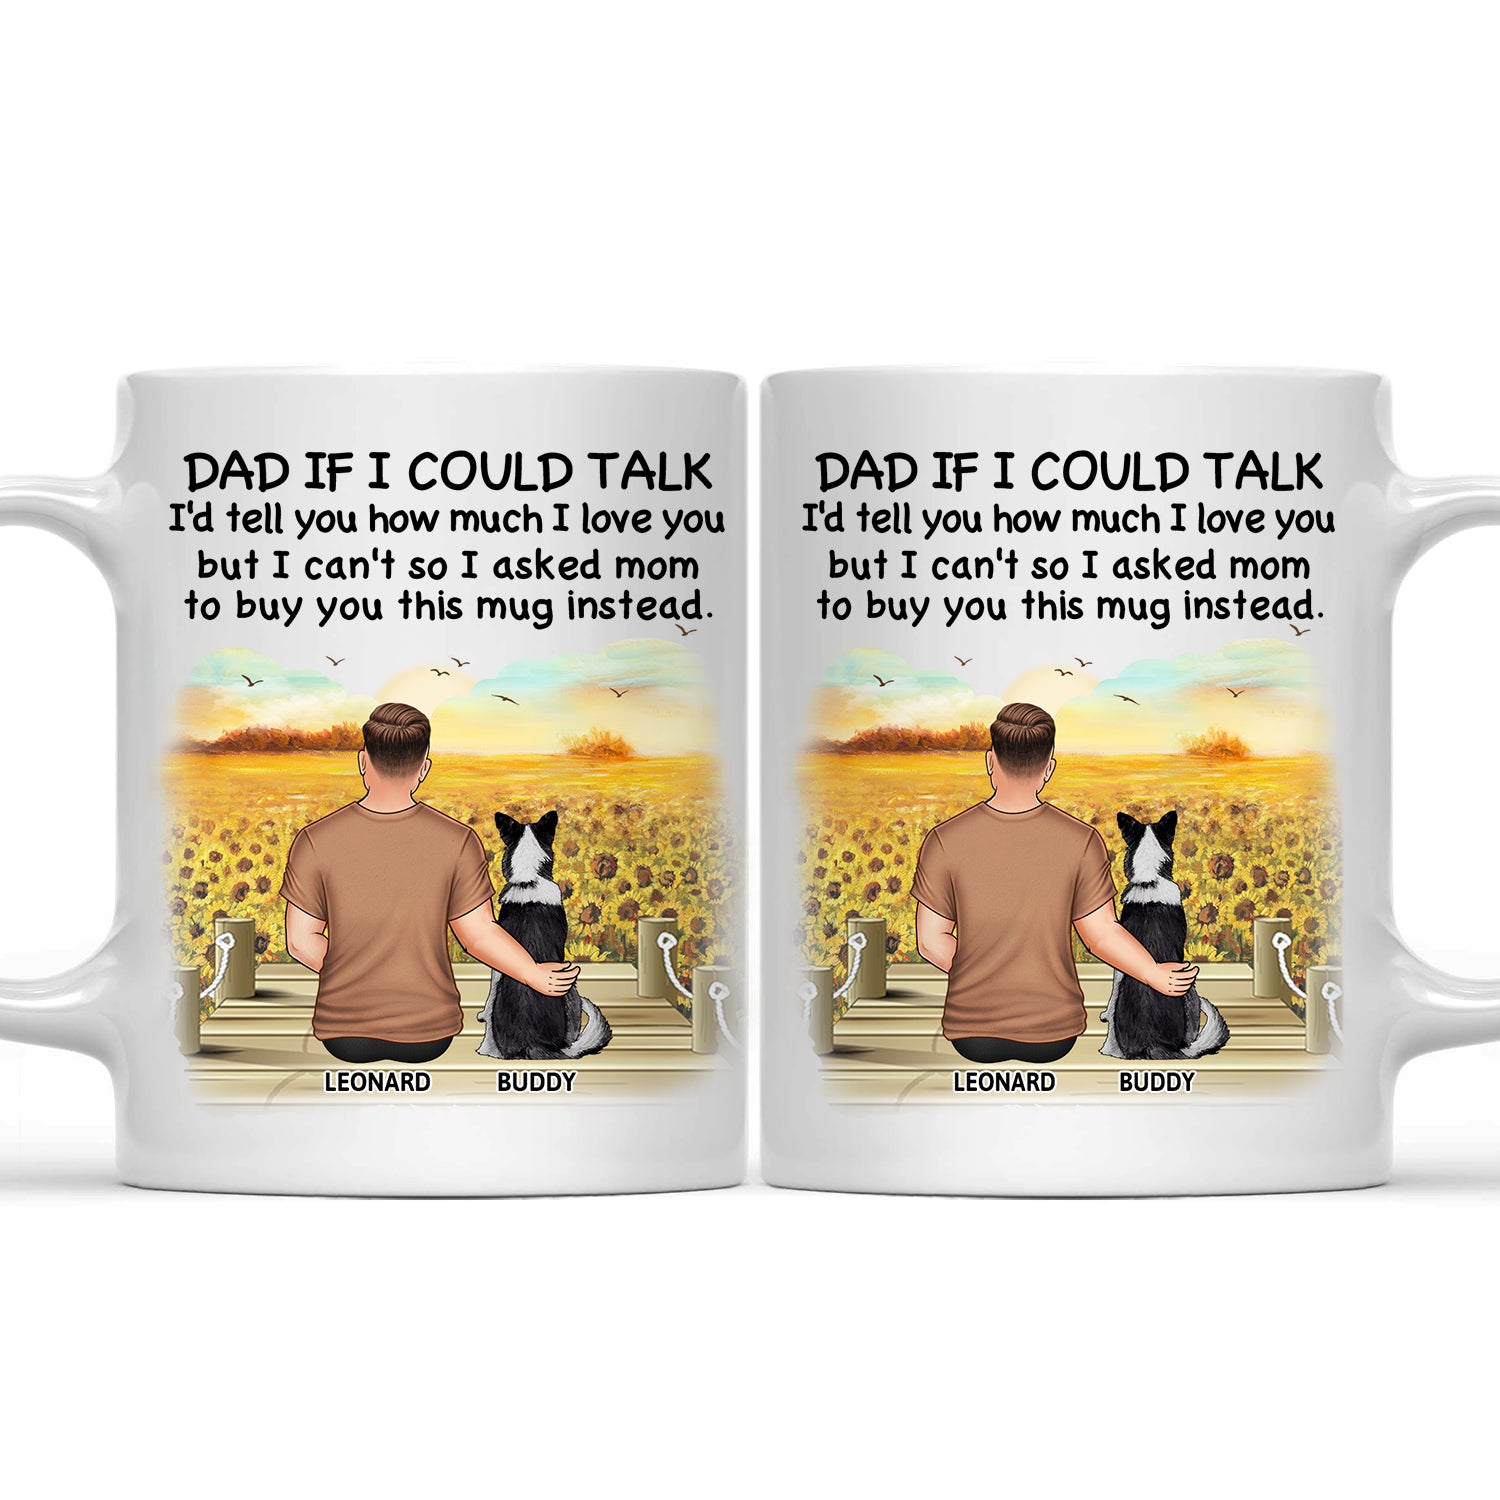 Dog Dad I'd Tell You How Much I Love You - Personalized Mug